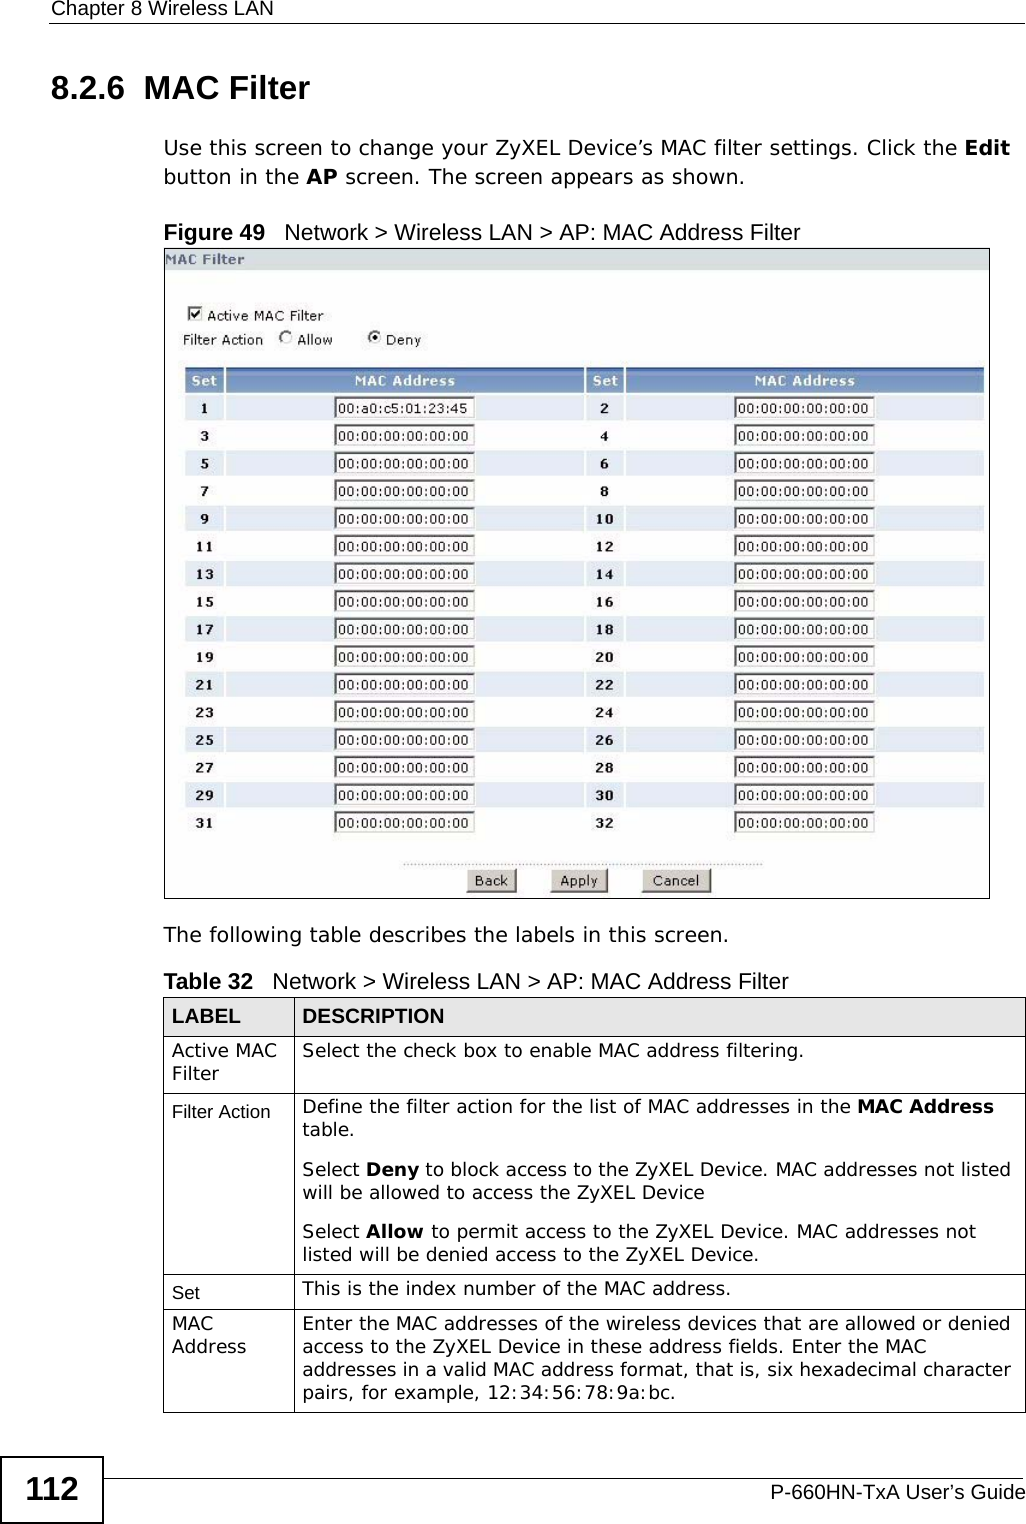 Chapter 8 Wireless LANP-660HN-TxA User’s Guide1128.2.6  MAC Filter    Use this screen to change your ZyXEL Device’s MAC filter settings. Click the Edit button in the AP screen. The screen appears as shown.Figure 49   Network &gt; Wireless LAN &gt; AP: MAC Address FilterThe following table describes the labels in this screen.Table 32   Network &gt; Wireless LAN &gt; AP: MAC Address FilterLABEL DESCRIPTIONActive MAC Filter Select the check box to enable MAC address filtering.Filter Action  Define the filter action for the list of MAC addresses in the MAC Address table. Select Deny to block access to the ZyXEL Device. MAC addresses not listed will be allowed to access the ZyXEL Device Select Allow to permit access to the ZyXEL Device. MAC addresses not listed will be denied access to the ZyXEL Device. Set This is the index number of the MAC address.MAC Address Enter the MAC addresses of the wireless devices that are allowed or denied access to the ZyXEL Device in these address fields. Enter the MAC addresses in a valid MAC address format, that is, six hexadecimal character pairs, for example, 12:34:56:78:9a:bc.